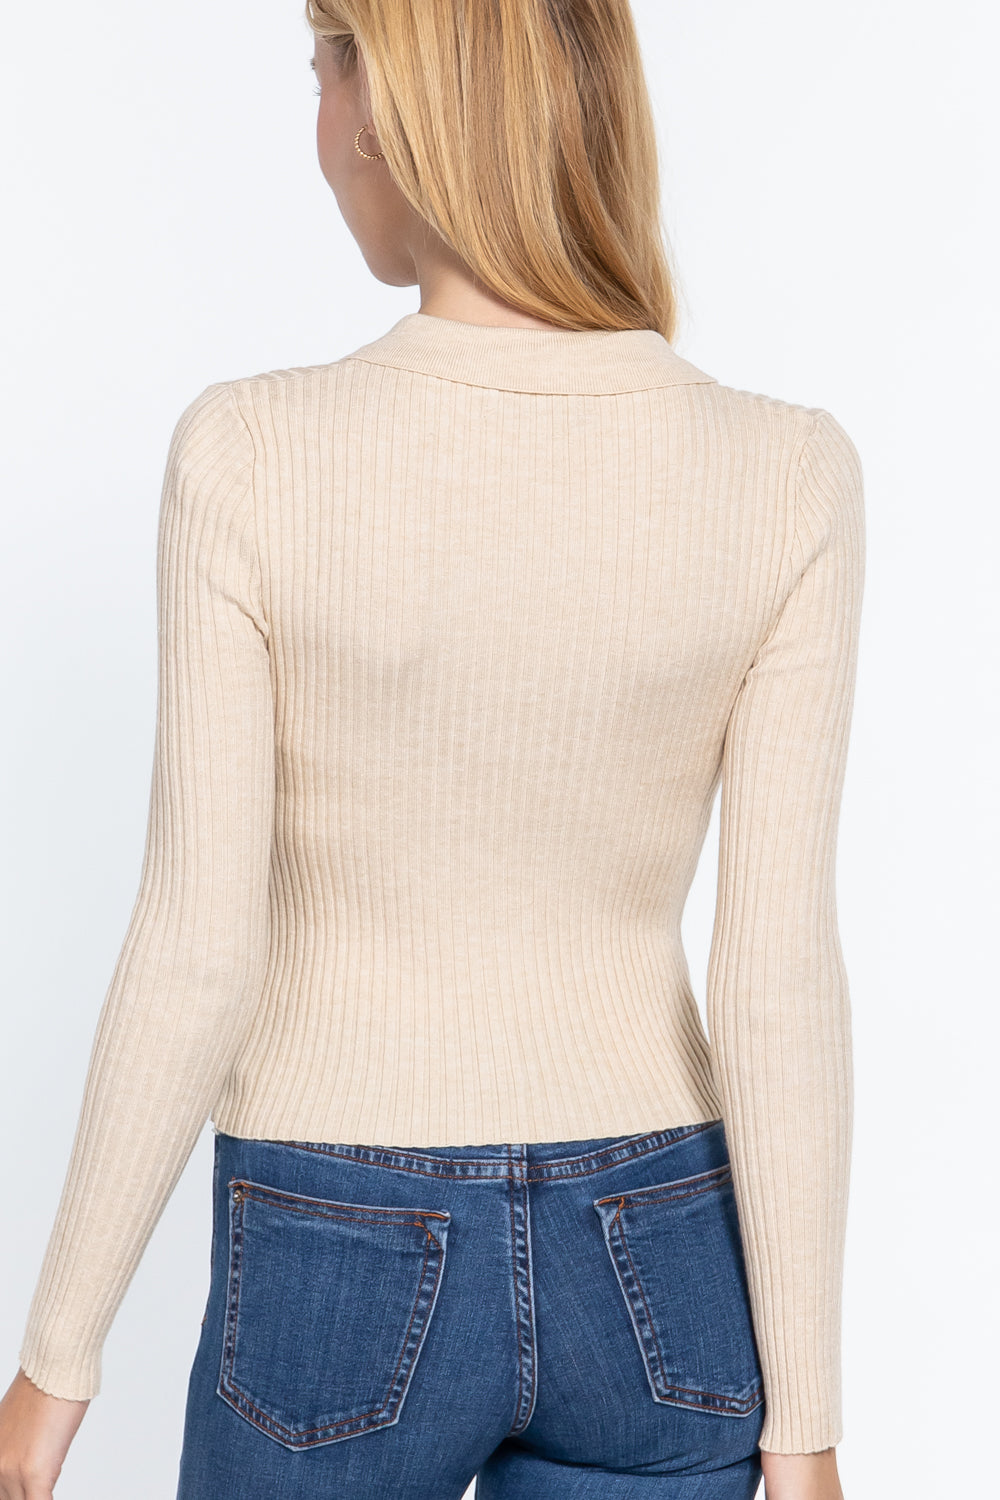 Notched Collar Zippered Sweater Notched Collar Zippered Sweater - M&R CORNER M&R CORNER